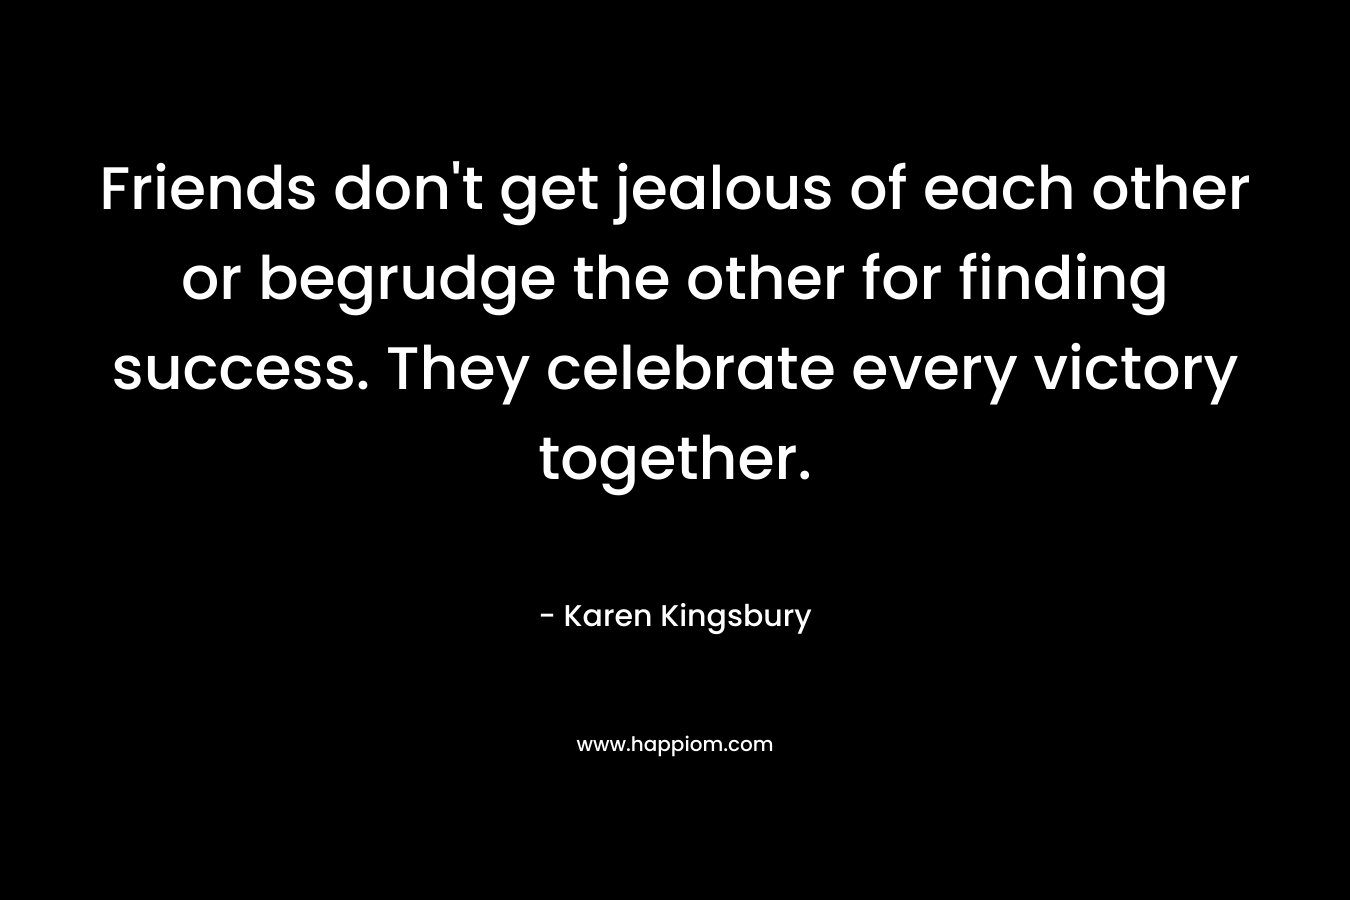 Friends don't get jealous of each other or begrudge the other for finding success. They celebrate every victory together.